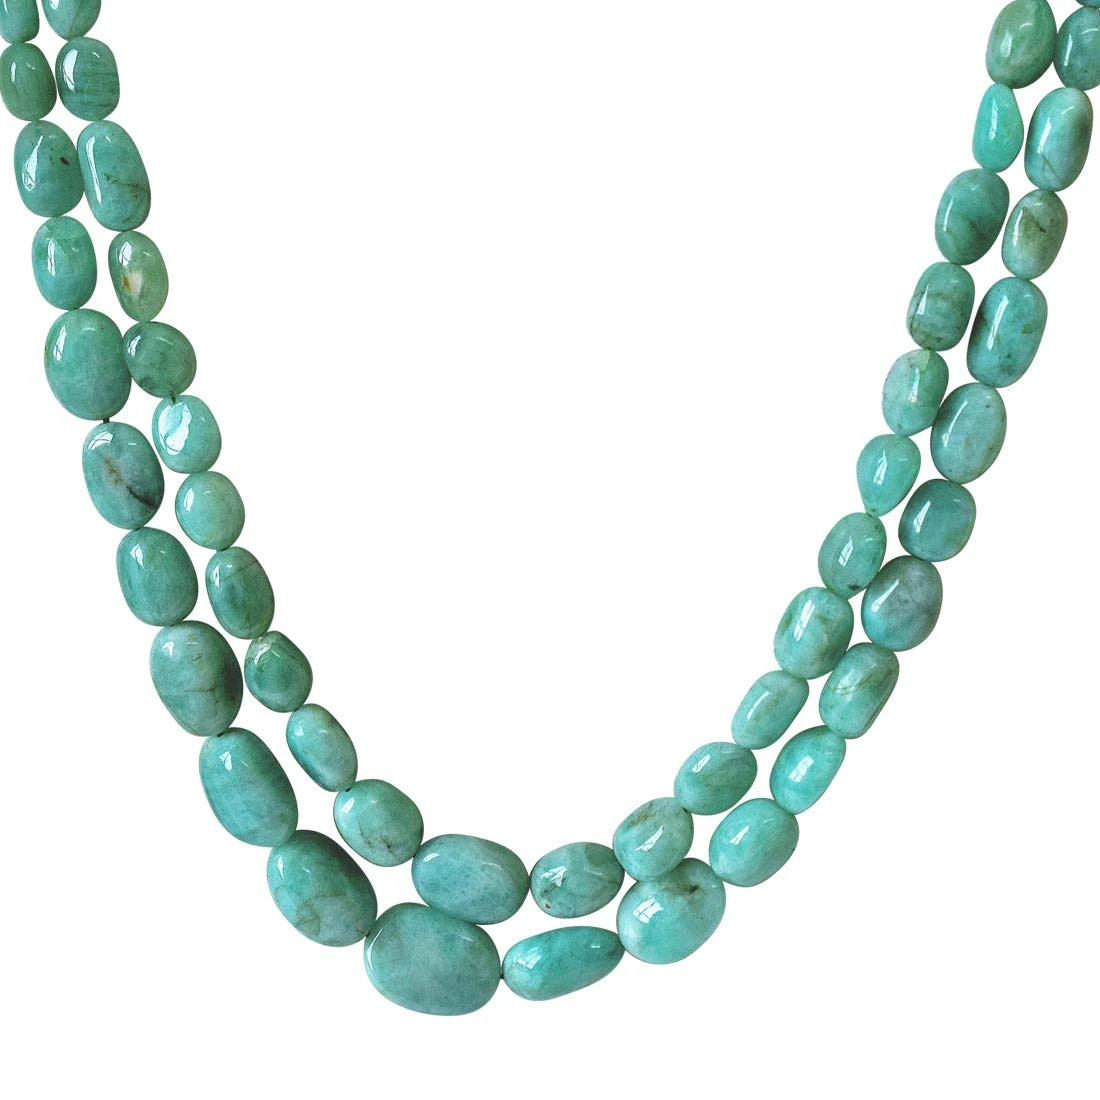 Two Line 274.48cts REAL Natural Light Greenish Oval Emerald Necklace for Women (274.48cts EMR Neck)